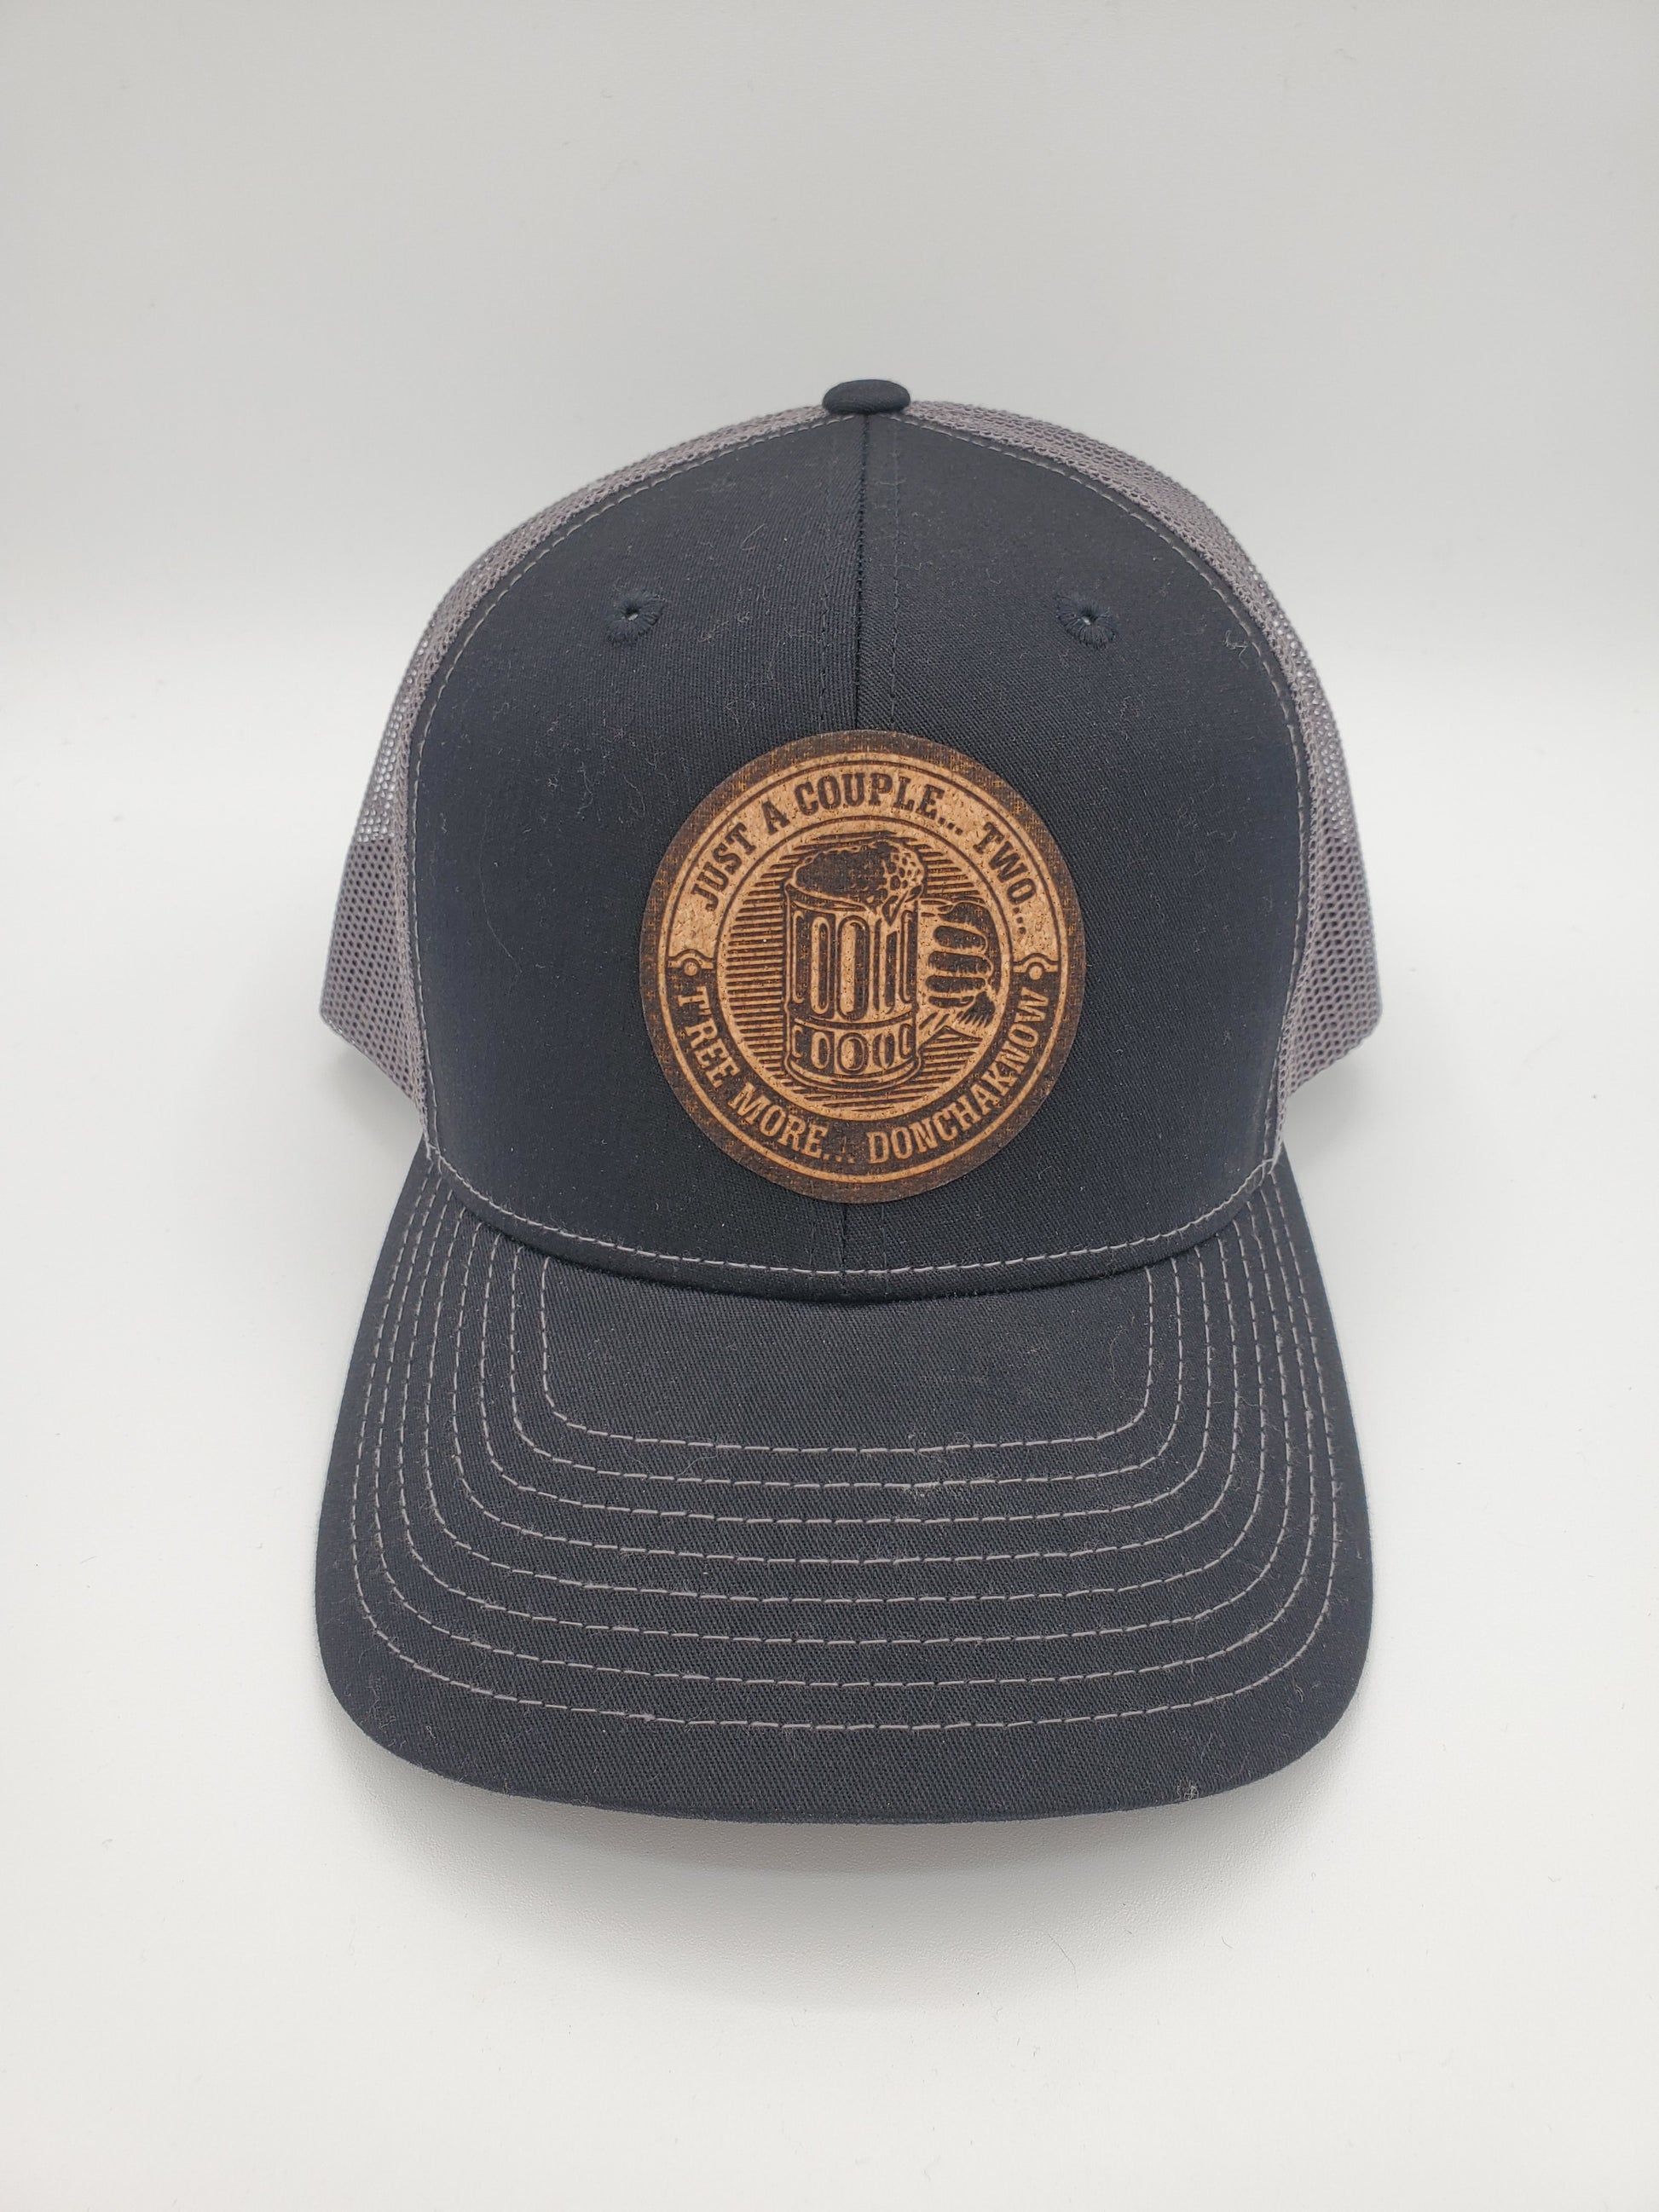 We heard trucker hats are in style 😎 Check out the new JOOLA